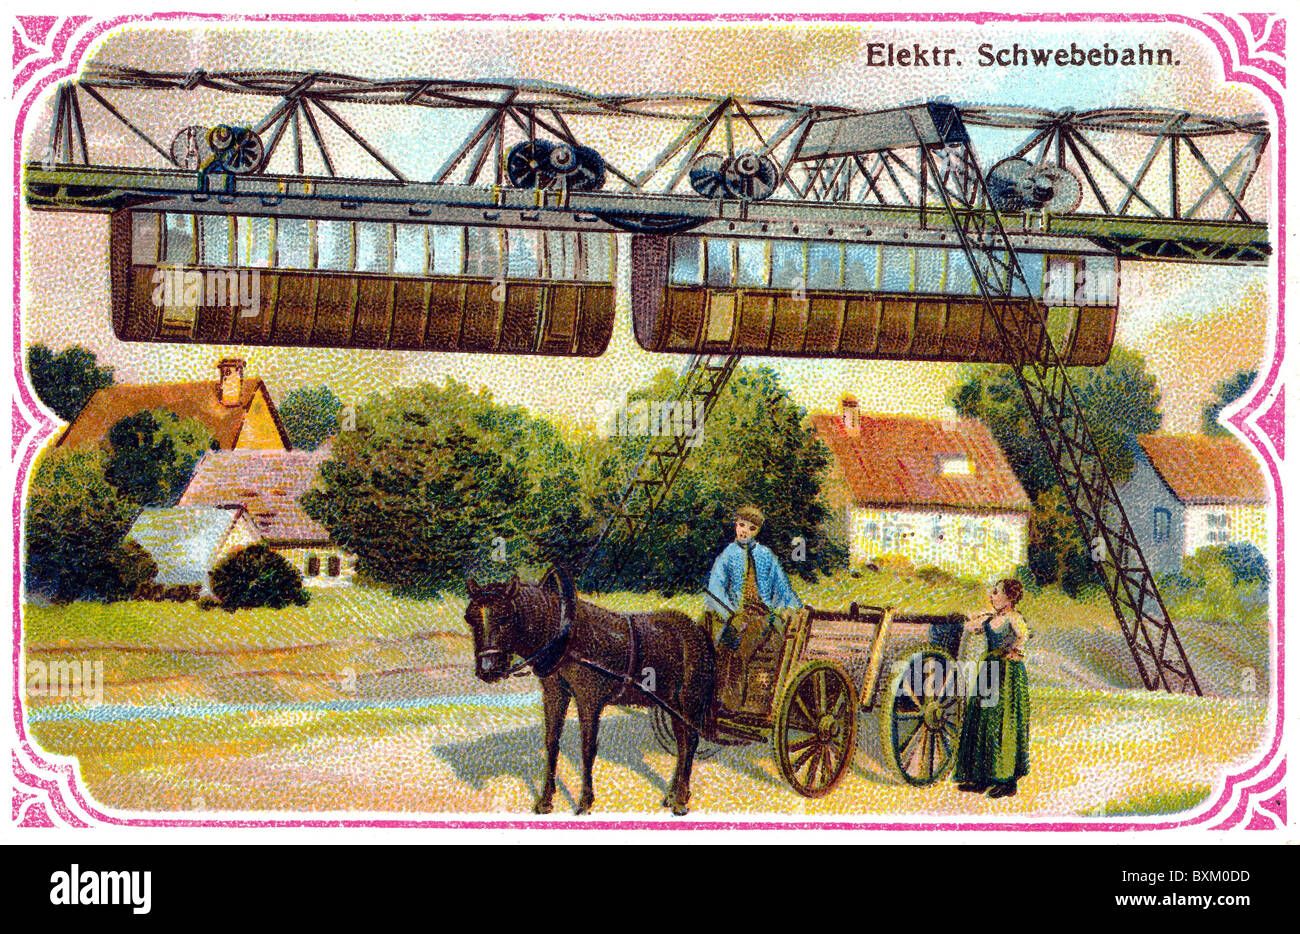 transport / transportation,railway,train,Wuppertal suspension railway,above the river Wupper,opened in 1901,16 millions Goldmark costs,Liebig collection card,from series: different trains,lithograph,Germany,circa 1907,1900s,00s,20th century,historic,historical,overhead track,overhead tracks,suspension railway,transportation,vehicle,public transport,public transportation,public transit,public conveyance,Vohwinkel,Elberfeld,Barmen,suburban services,local traffic,improvement,improvements,invention,inventions,farmer,farmers,hors,Additional-Rights-Clearences-Not Available Stock Photo